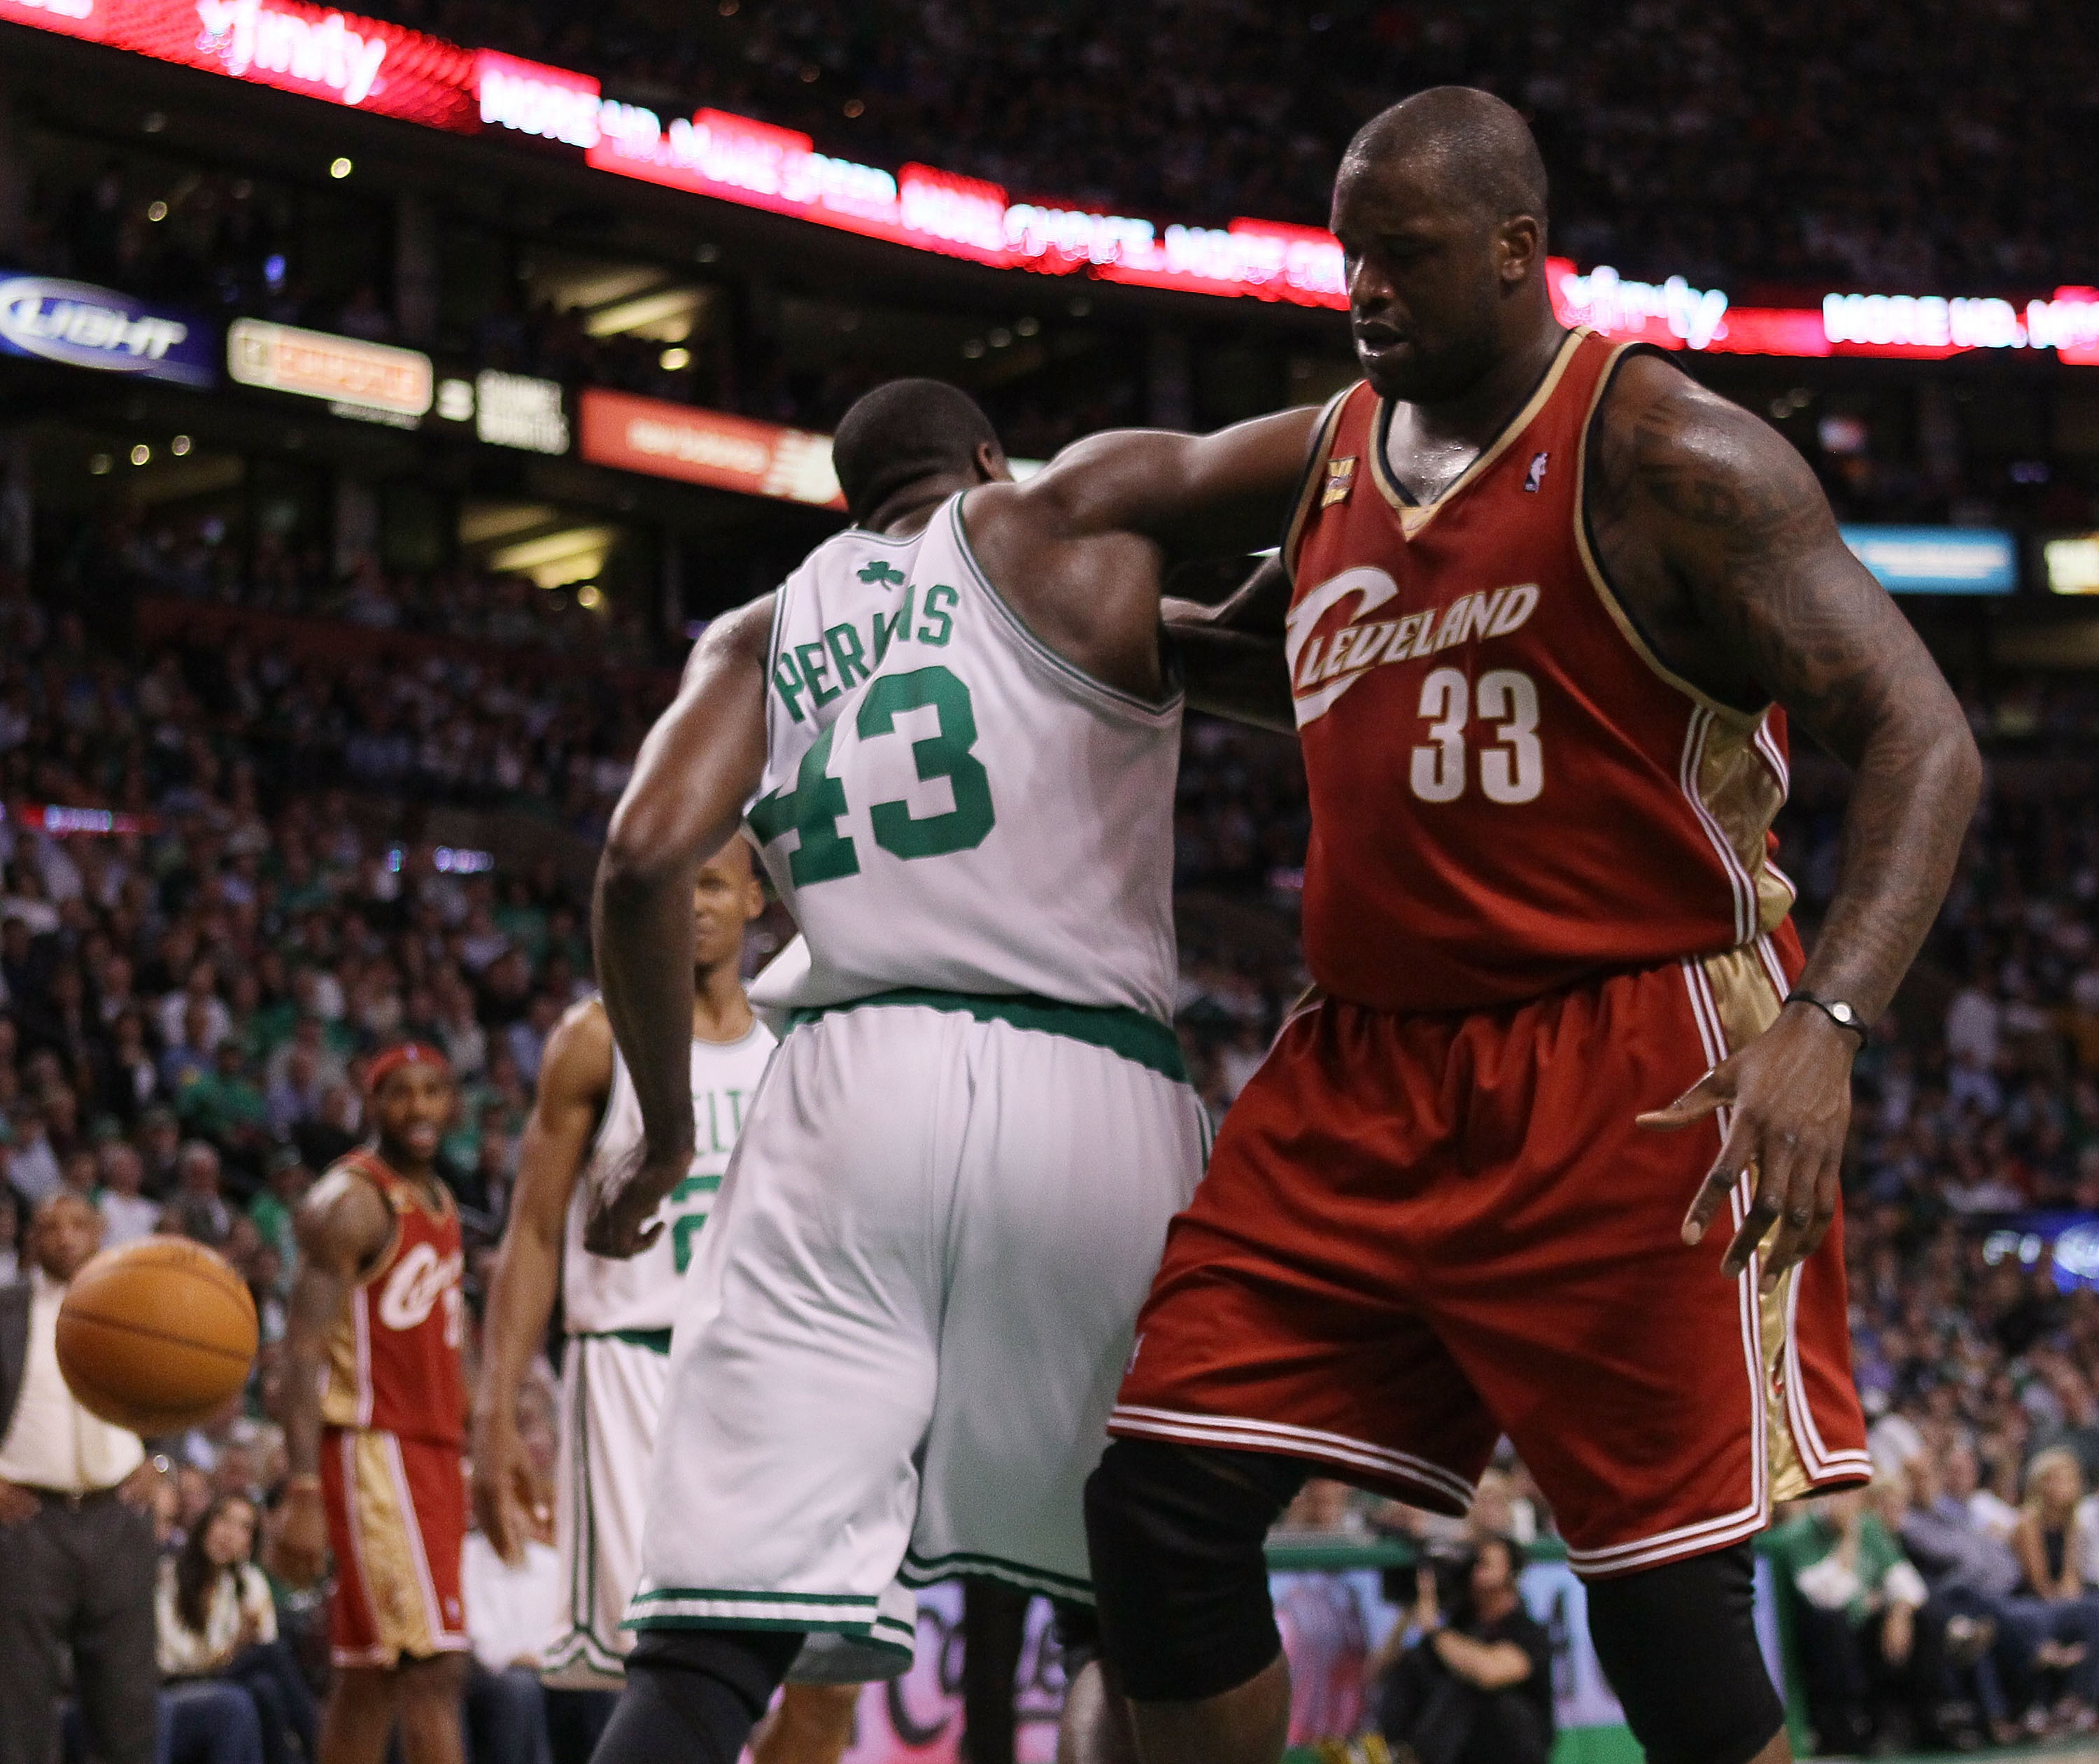 BOSTON - MAY 13:  Kendrick Perkins #43 of the Boston Celtics and Shaquille O'Neal #33 of the Cleveland Cavaliers fight for the ball during Game Six of the Eastern Conference Semifinals of the 2010 NBA playoffs at TD Garden on May 13, 2010 in Boston, Massa